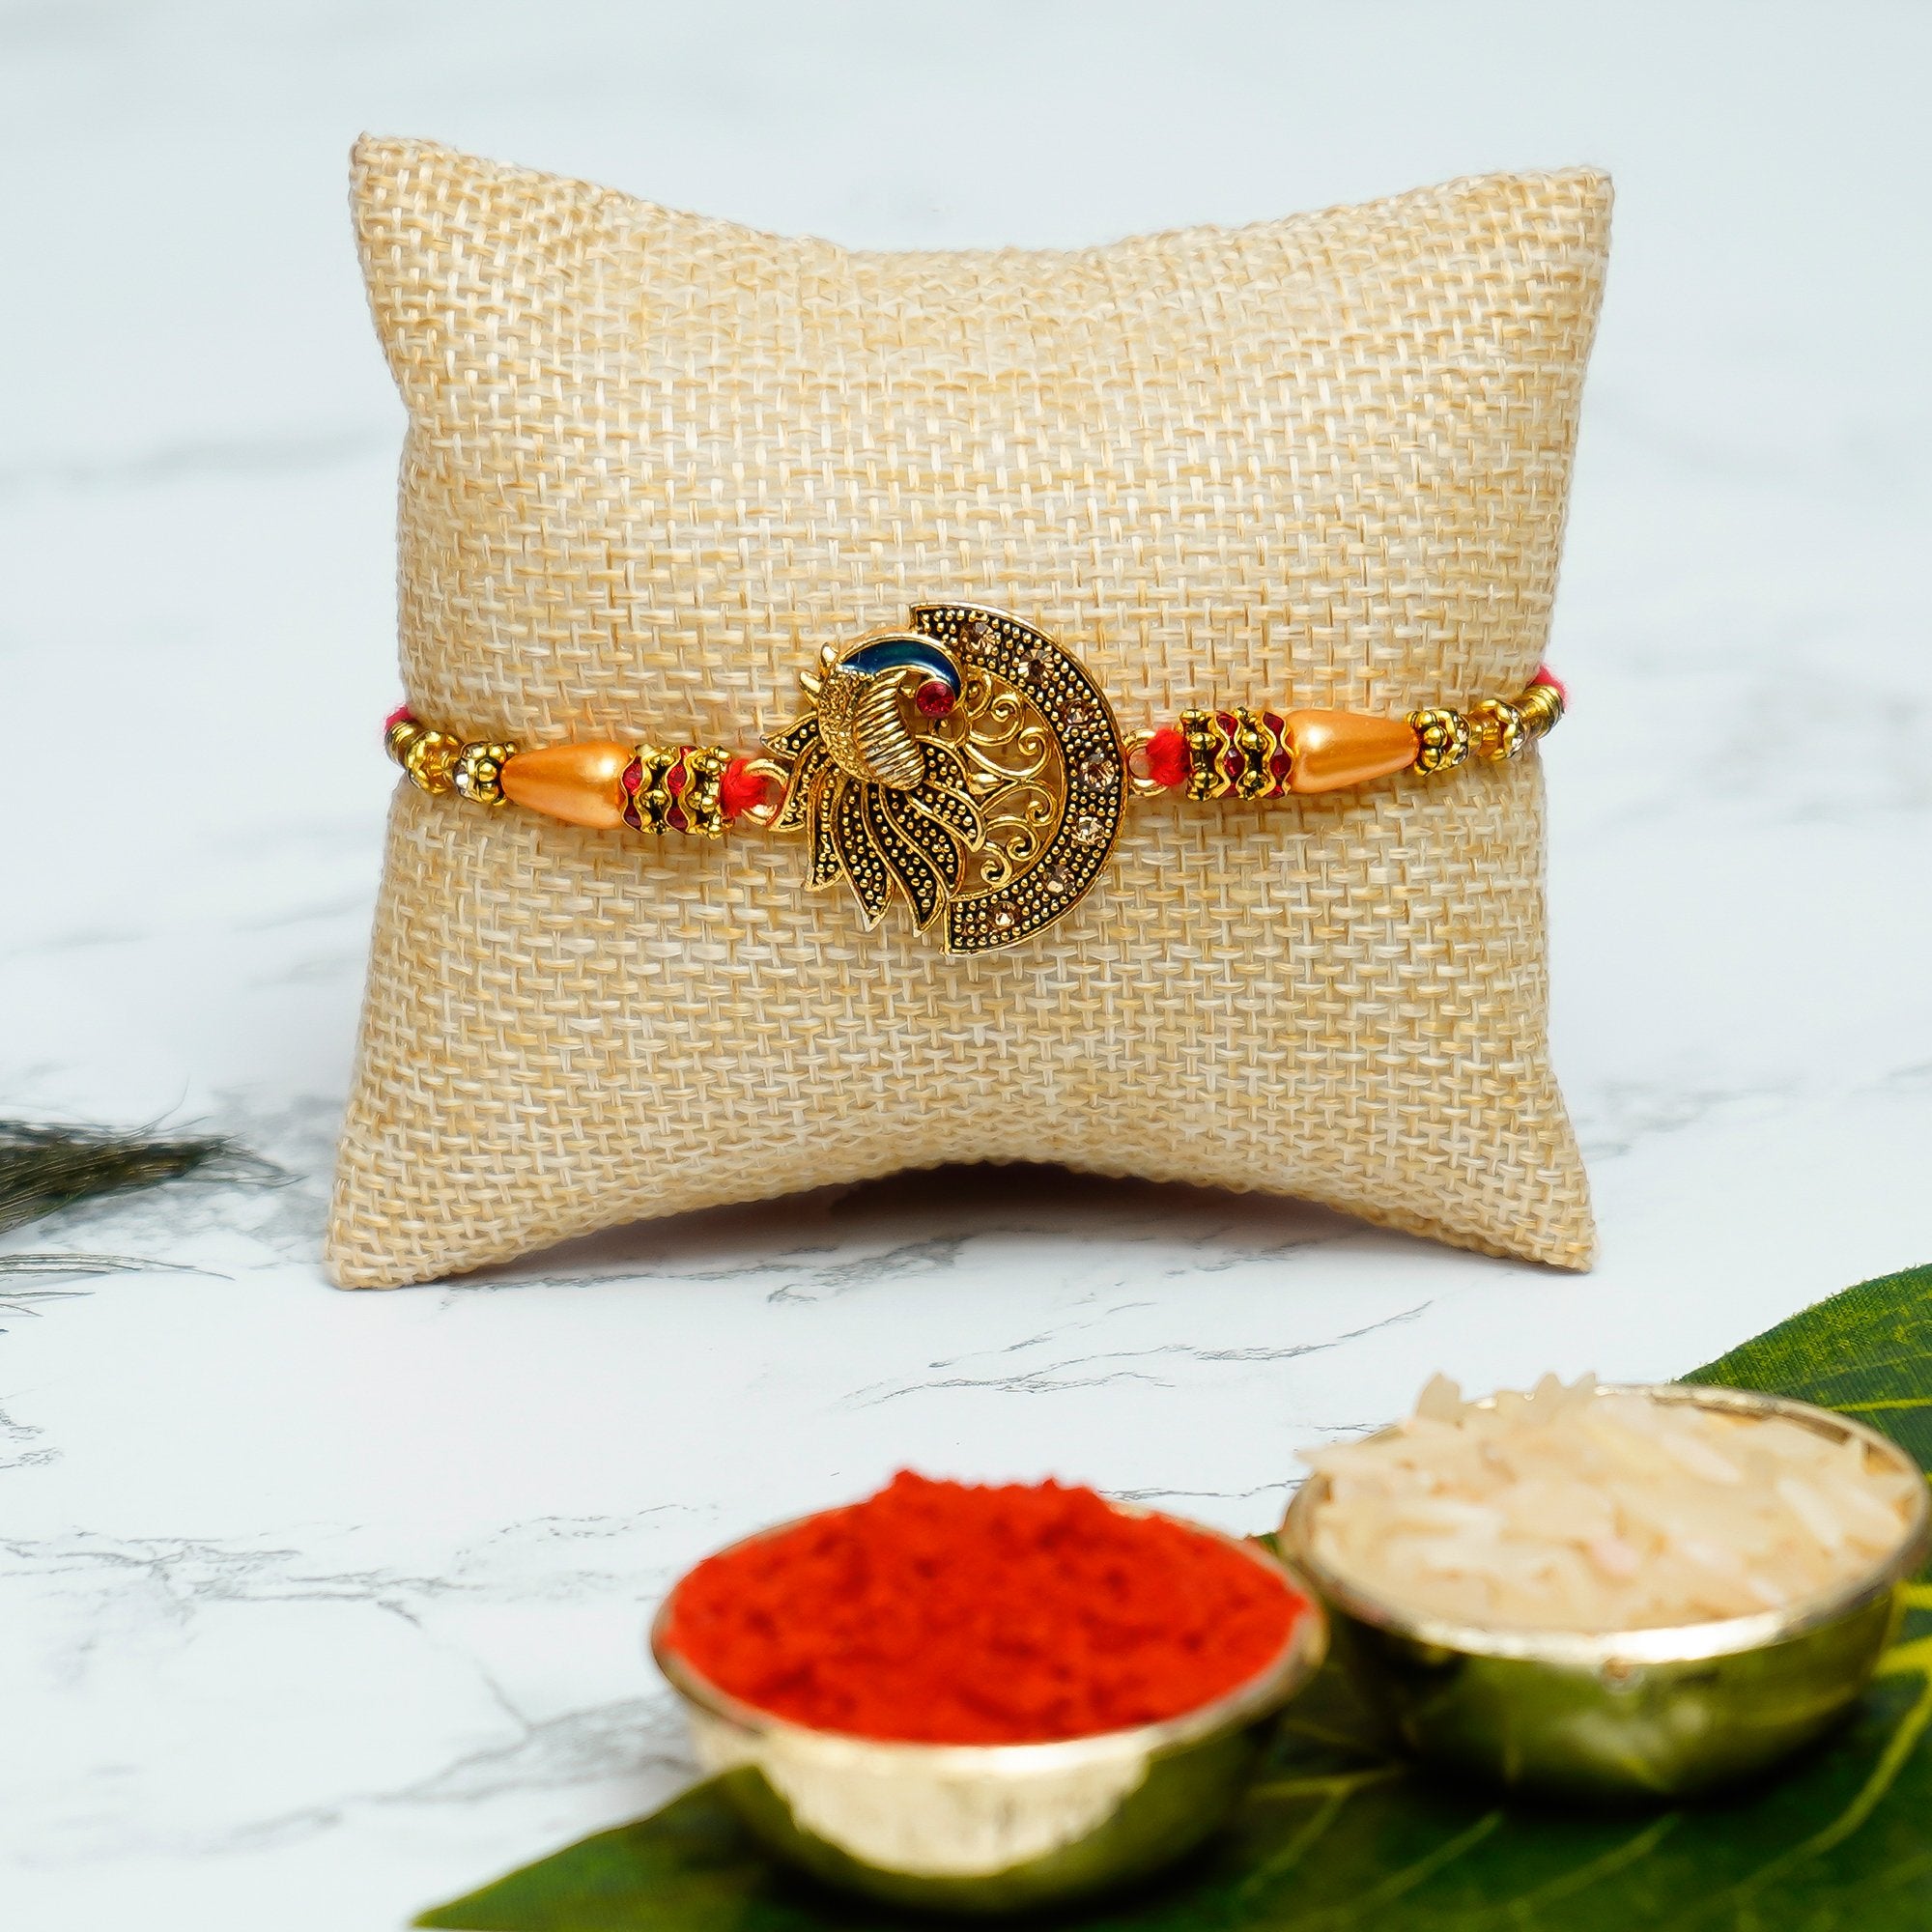 Designer Peacock Rakhi with Golden Silver Handcrafted Palm Buddha Showpiece and Roli Chawal Pack, Best Wishes Greeting Card 1